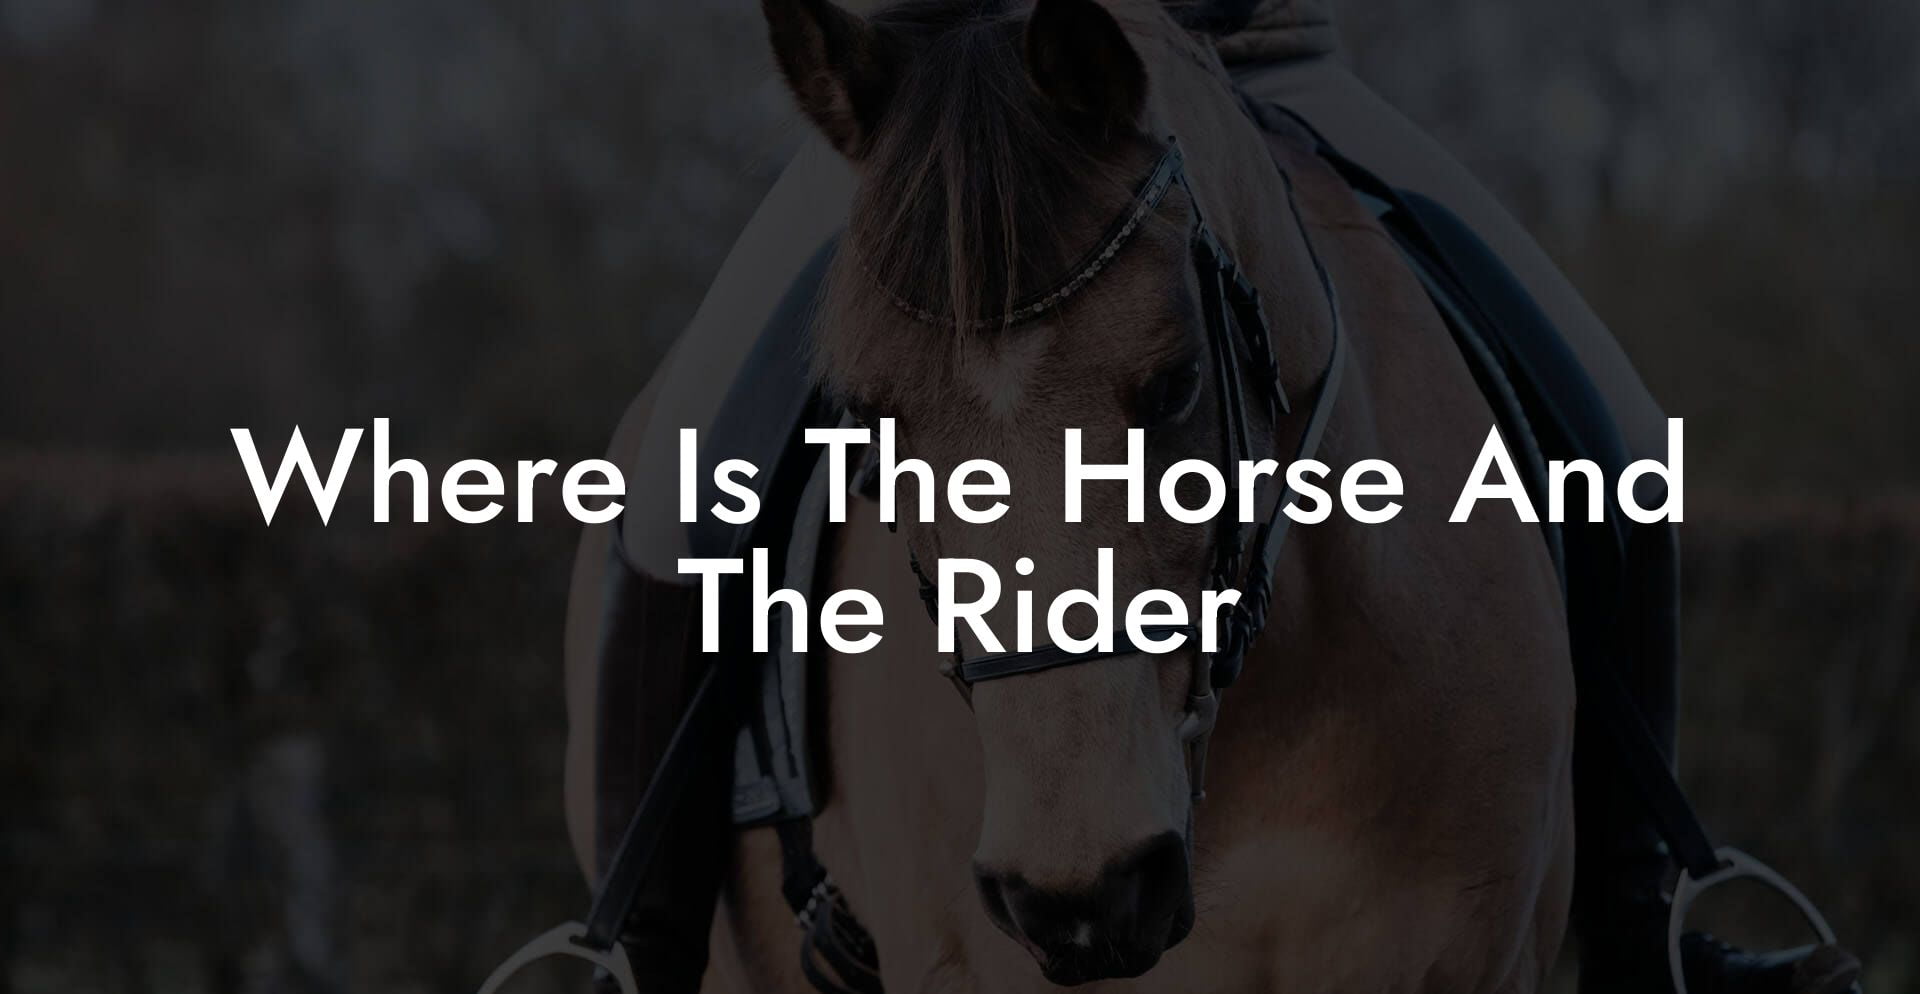 Where Is The Horse And The Rider